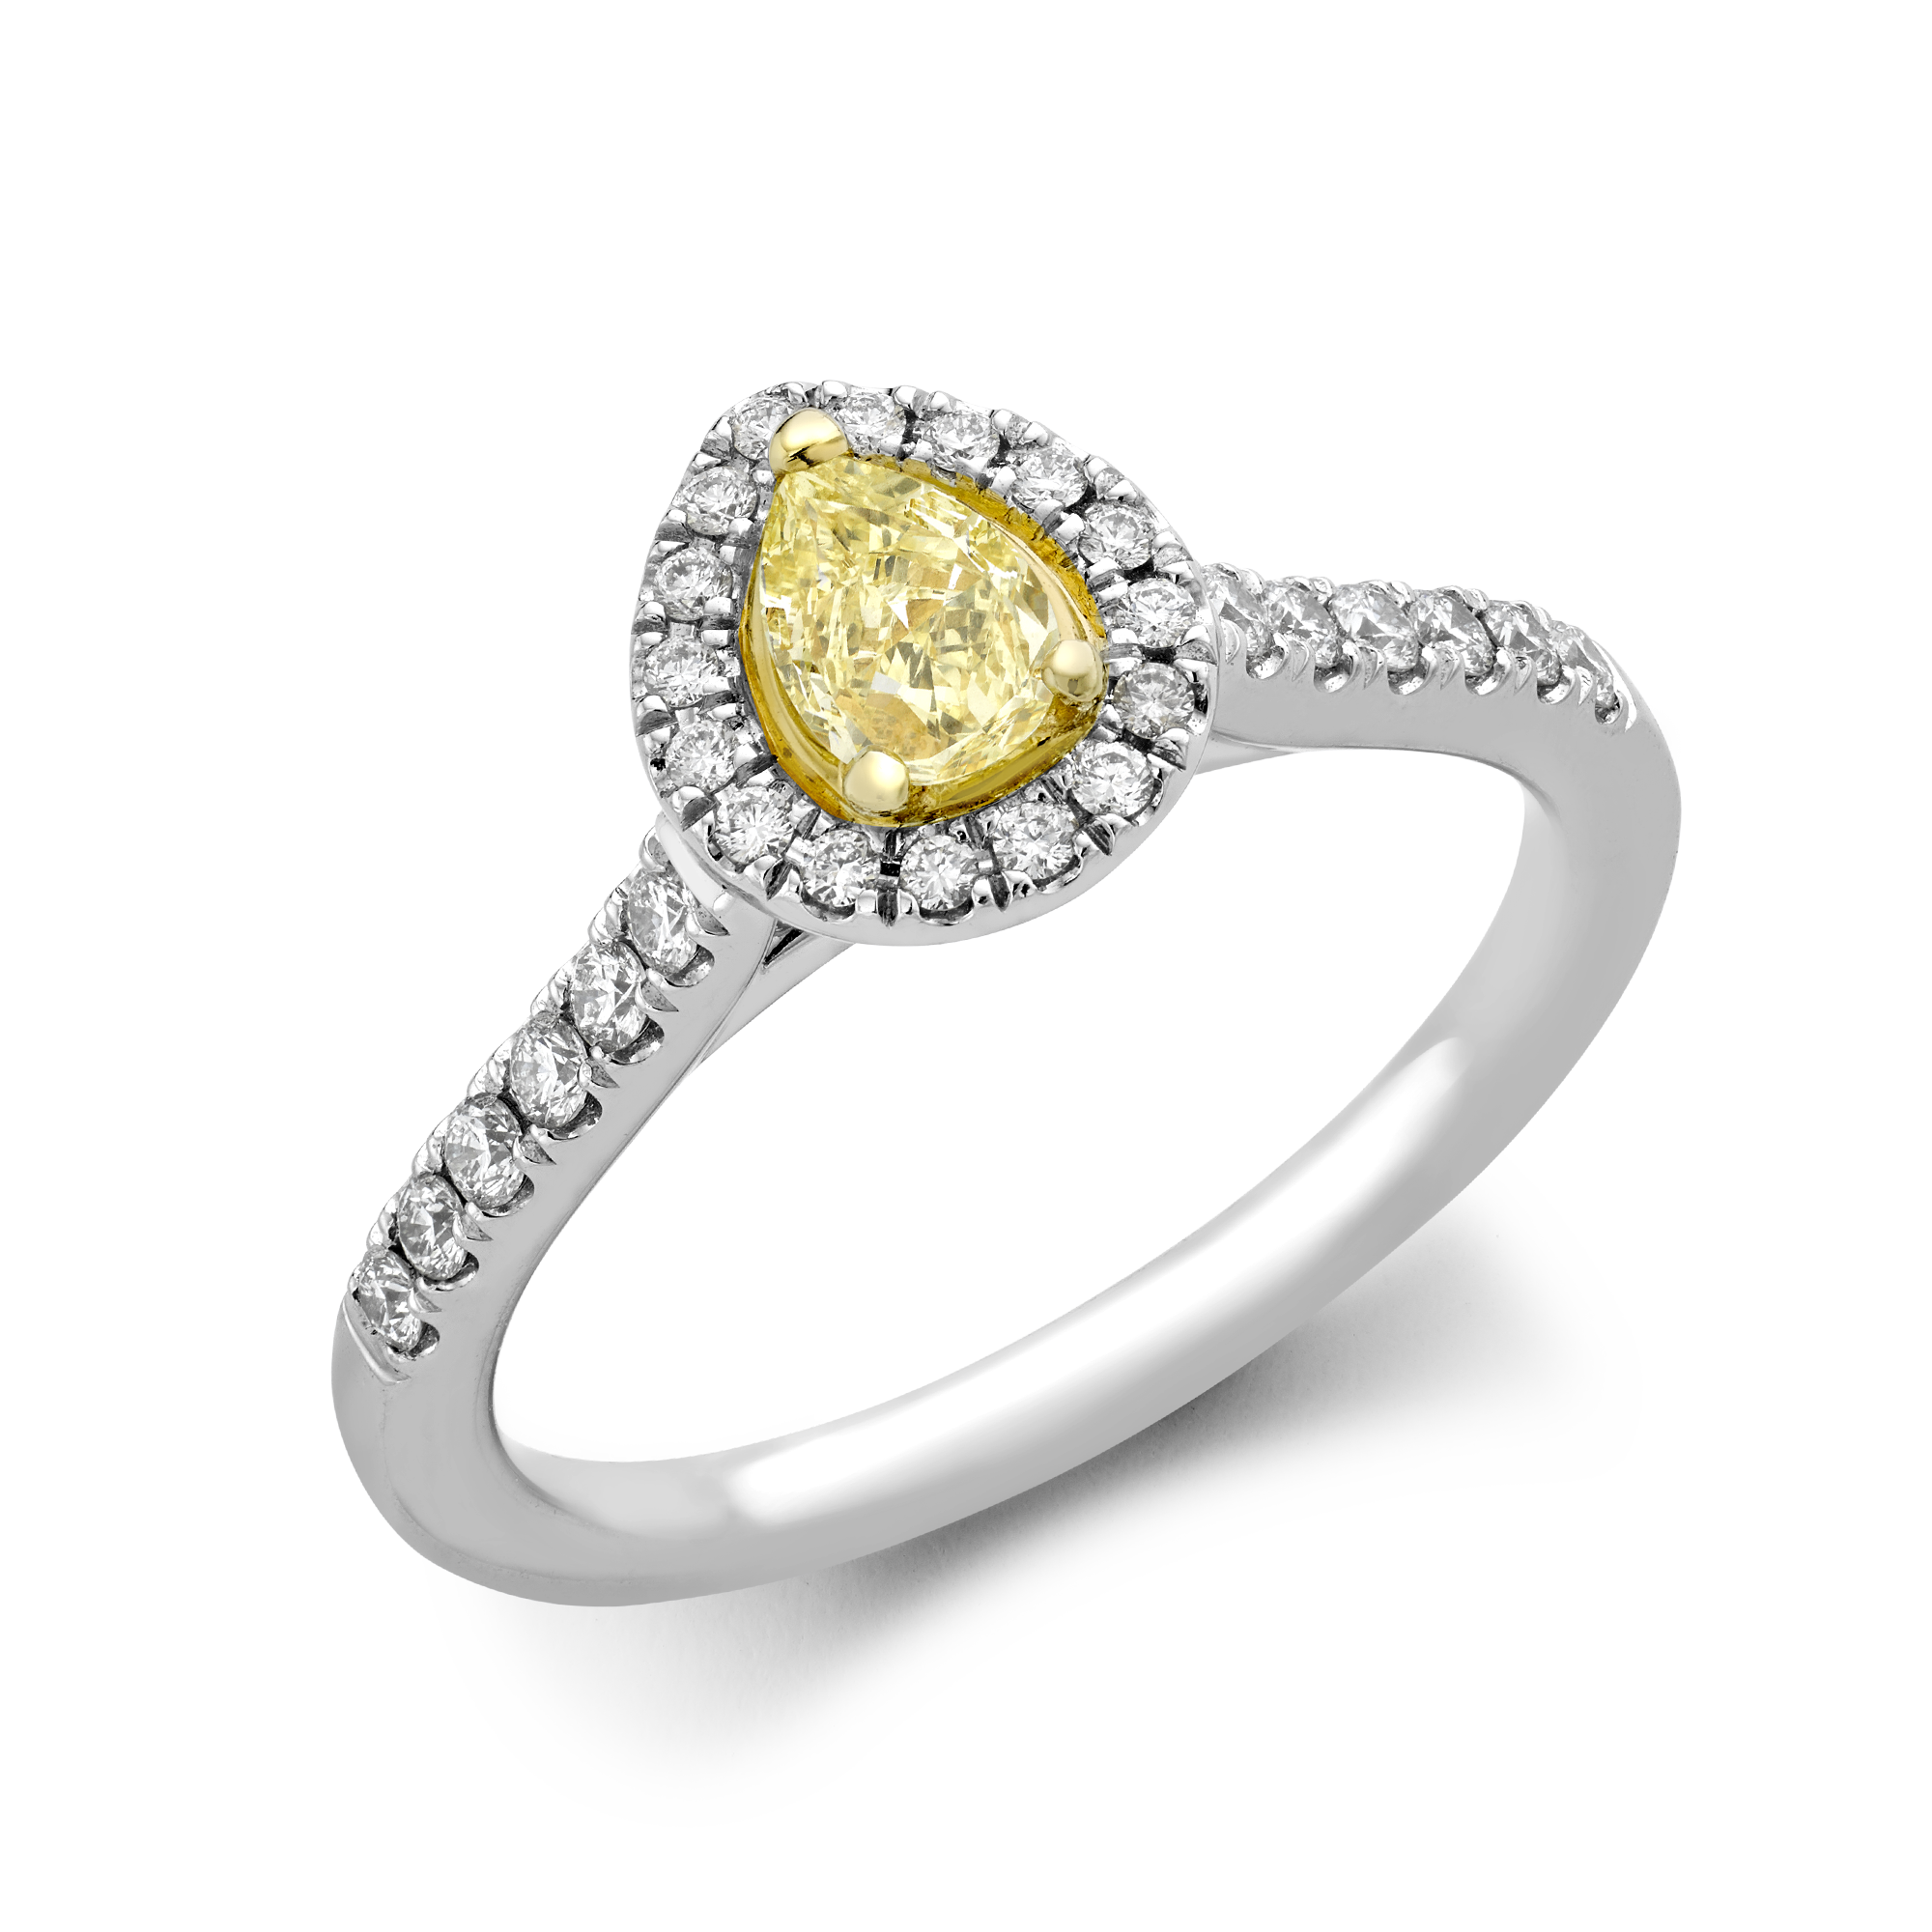 Celestial 0.31ct Fancy Light Yellow Diamond Cluster Ring Pearshape, Claw Set_1